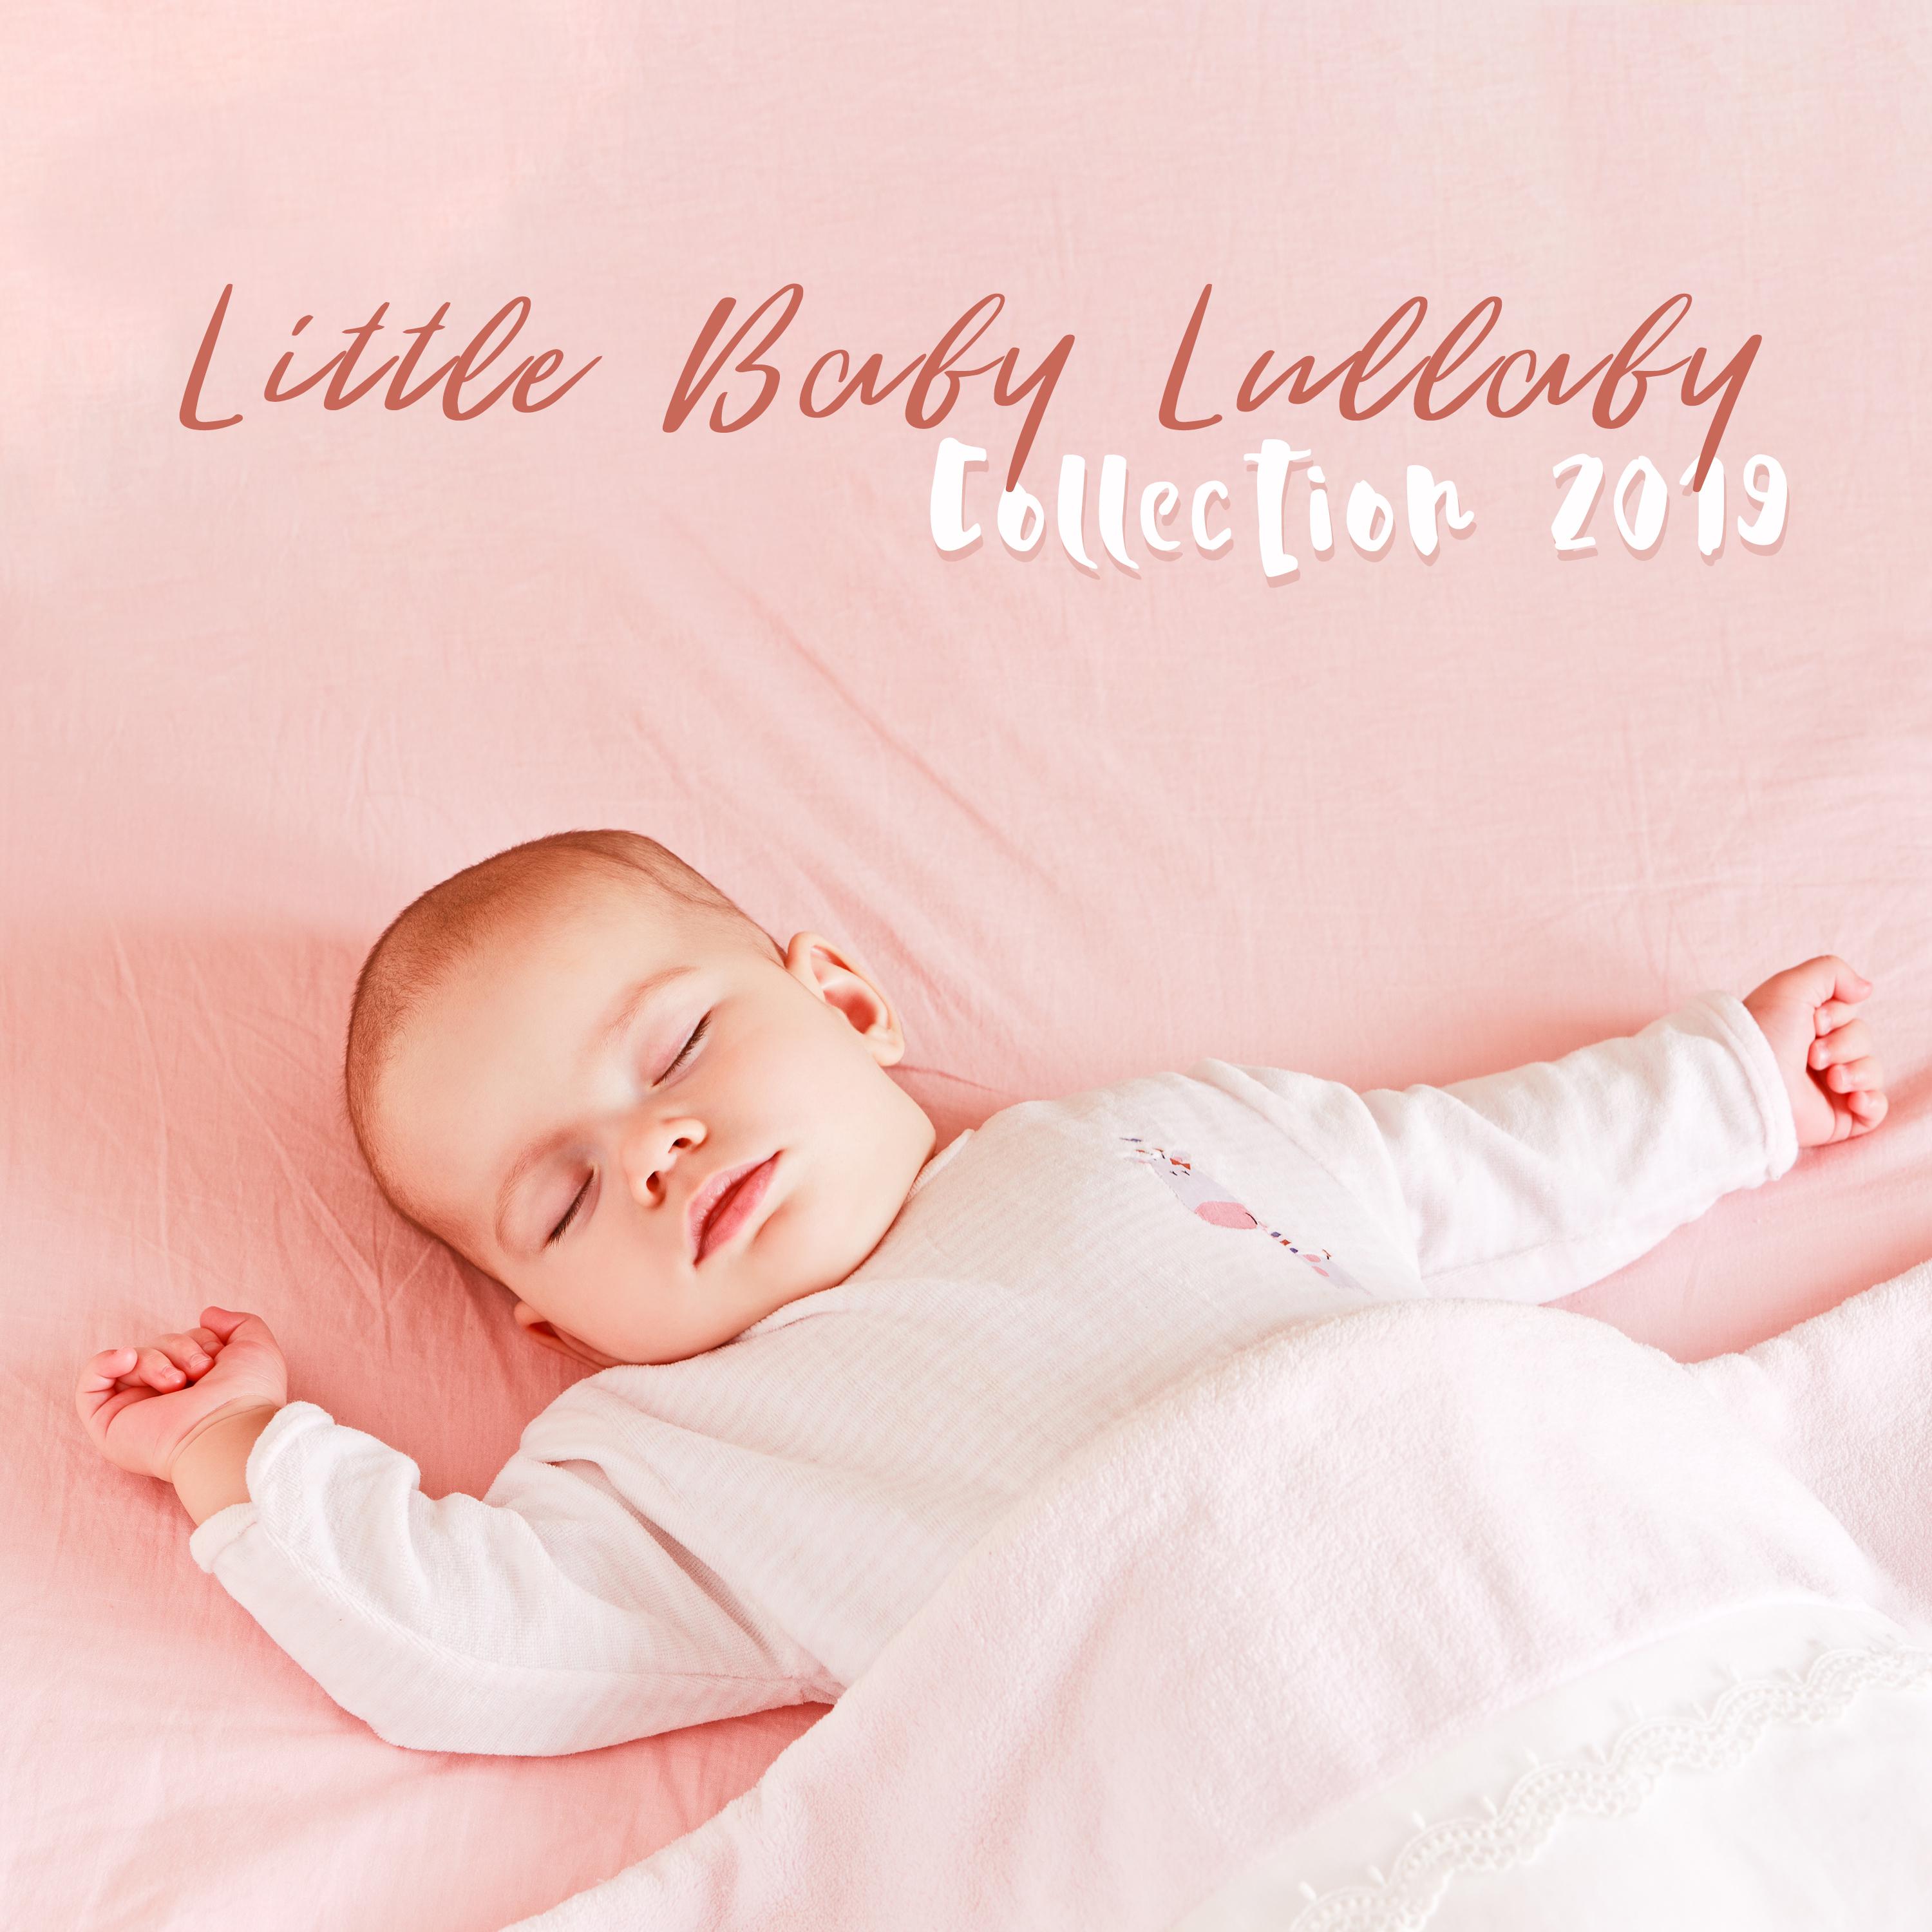 Little Baby Lullaby Collection 2019 (15 Slow & Calm Melodies for Your Baby)